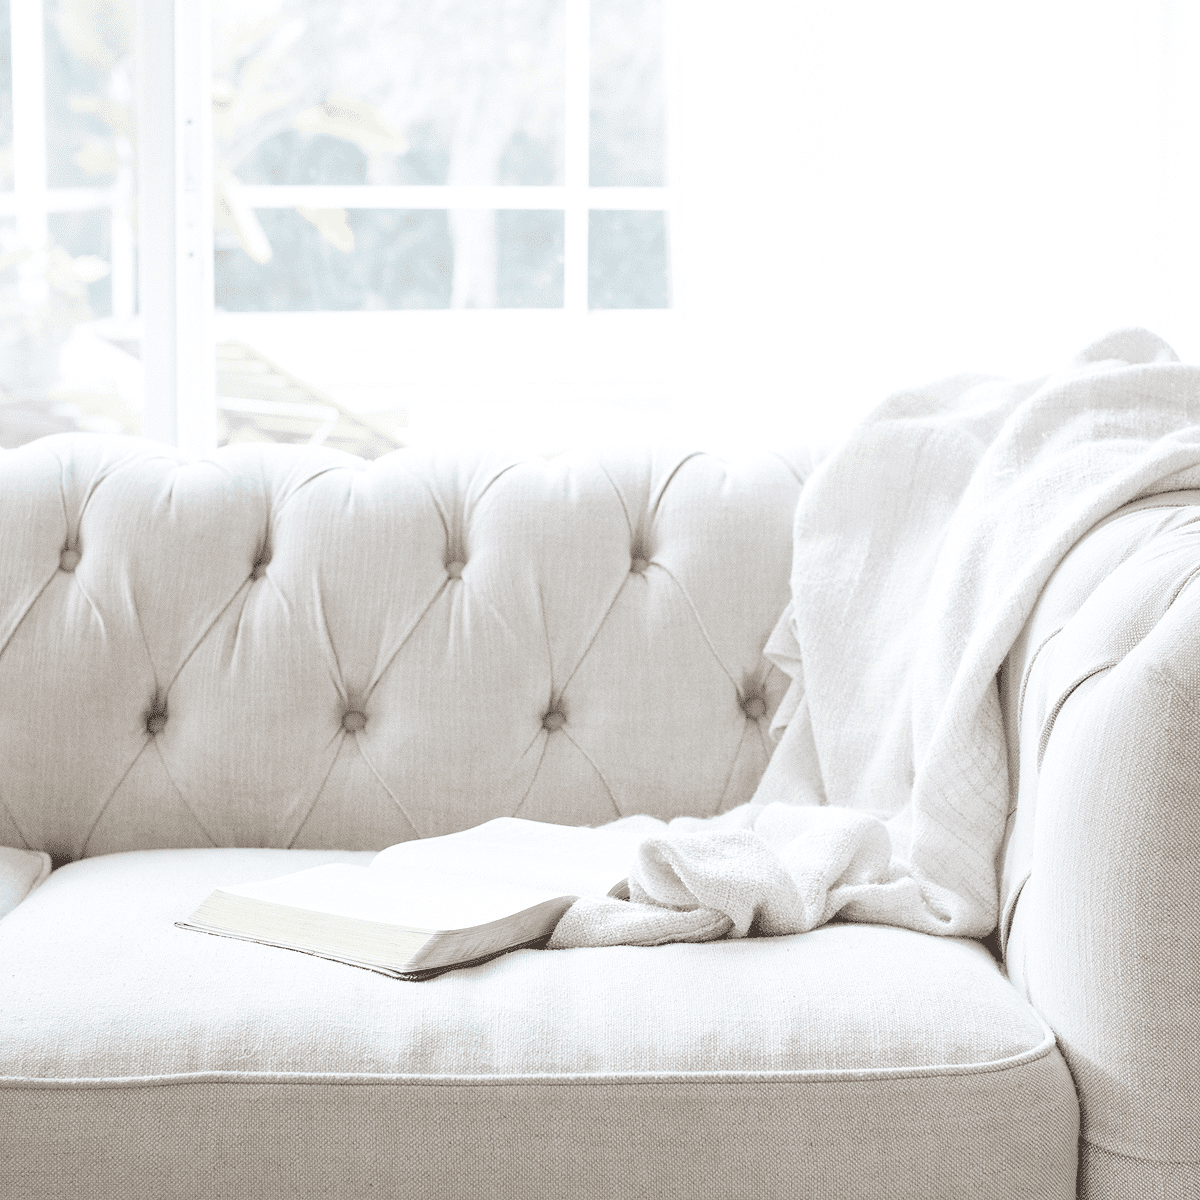 light gray couch with a white throw blanket and open bible on top.